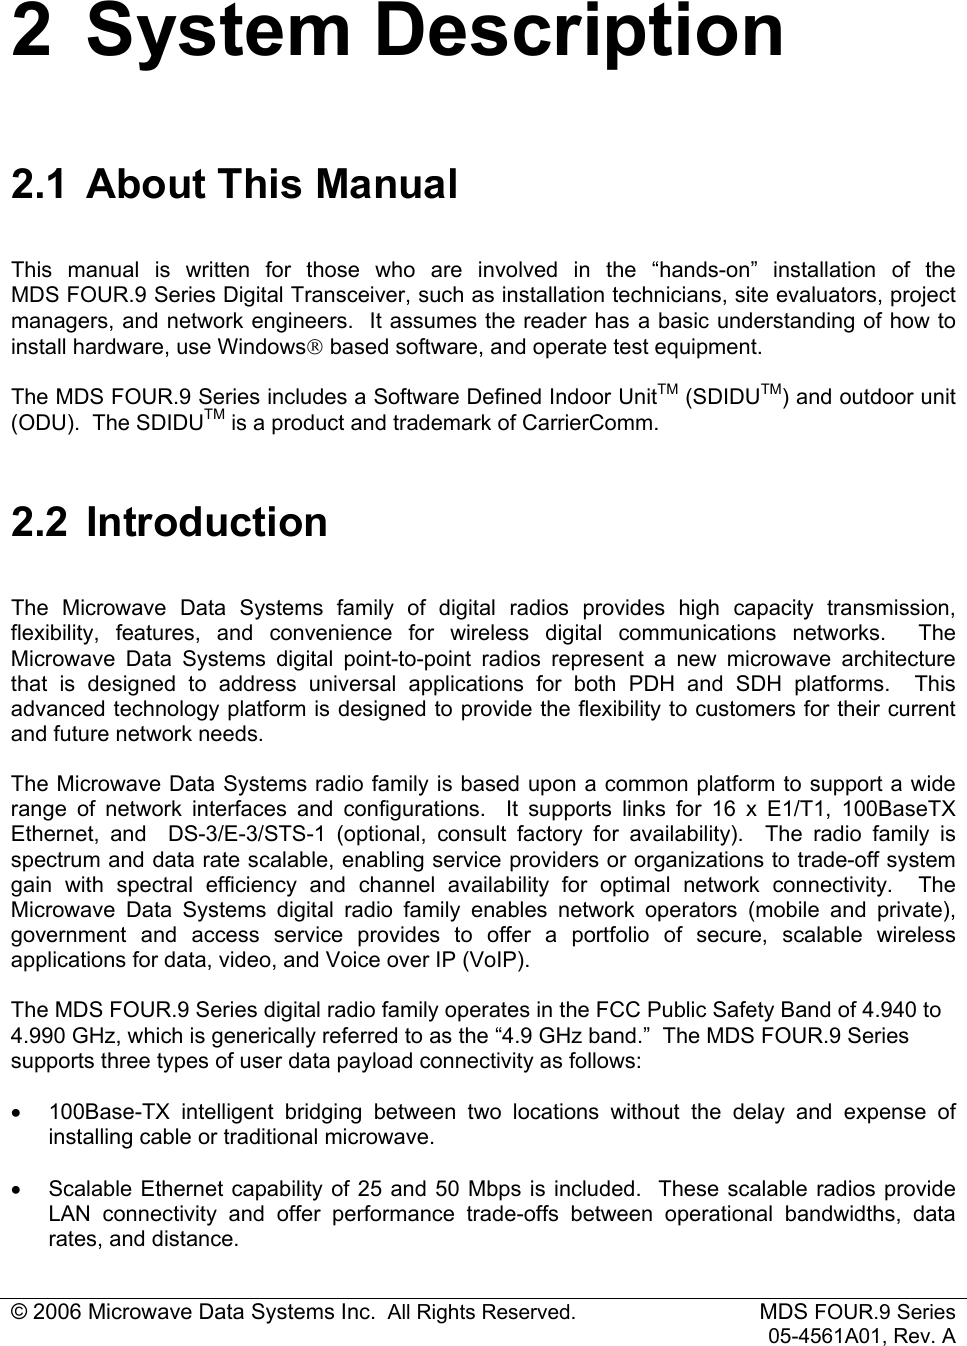 © 2006 Microwave Data Systems Inc.  All Rights Reserved. MDS FOUR.9 Series 05-4561A01, Rev. A 2 System Description 2.1  About This Manual This manual is written for those who are involved in the “hands-on” installation of the  MDS FOUR.9 Series Digital Transceiver, such as installation technicians, site evaluators, project managers, and network engineers.  It assumes the reader has a basic understanding of how to install hardware, use Windows based software, and operate test equipment. The MDS FOUR.9 Series includes a Software Defined Indoor UnitTM (SDIDUTM) and outdoor unit (ODU).  The SDIDUTM is a product and trademark of CarrierComm. 2.2 Introduction The Microwave Data Systems family of digital radios provides high capacity transmission, flexibility, features, and convenience for wireless digital communications networks.  The Microwave Data Systems digital point-to-point radios represent a new microwave architecture that is designed to address universal applications for both PDH and SDH platforms.  This advanced technology platform is designed to provide the flexibility to customers for their current and future network needs. The Microwave Data Systems radio family is based upon a common platform to support a wide range of network interfaces and configurations.  It supports links for 16 x E1/T1, 100BaseTX Ethernet, and  DS-3/E-3/STS-1 (optional, consult factory for availability).  The radio family is spectrum and data rate scalable, enabling service providers or organizations to trade-off system gain with spectral efficiency and channel availability for optimal network connectivity.  The Microwave Data Systems digital radio family enables network operators (mobile and private), government and access service provides to offer a portfolio of secure, scalable wireless applications for data, video, and Voice over IP (VoIP).  The MDS FOUR.9 Series digital radio family operates in the FCC Public Safety Band of 4.940 to 4.990 GHz, which is generically referred to as the “4.9 GHz band.”  The MDS FOUR.9 Series supports three types of user data payload connectivity as follows: •  100Base-TX intelligent bridging between two locations without the delay and expense of installing cable or traditional microwave. •  Scalable Ethernet capability of 25 and 50 Mbps is included.  These scalable radios provide LAN connectivity and offer performance trade-offs between operational bandwidths, data rates, and distance.  